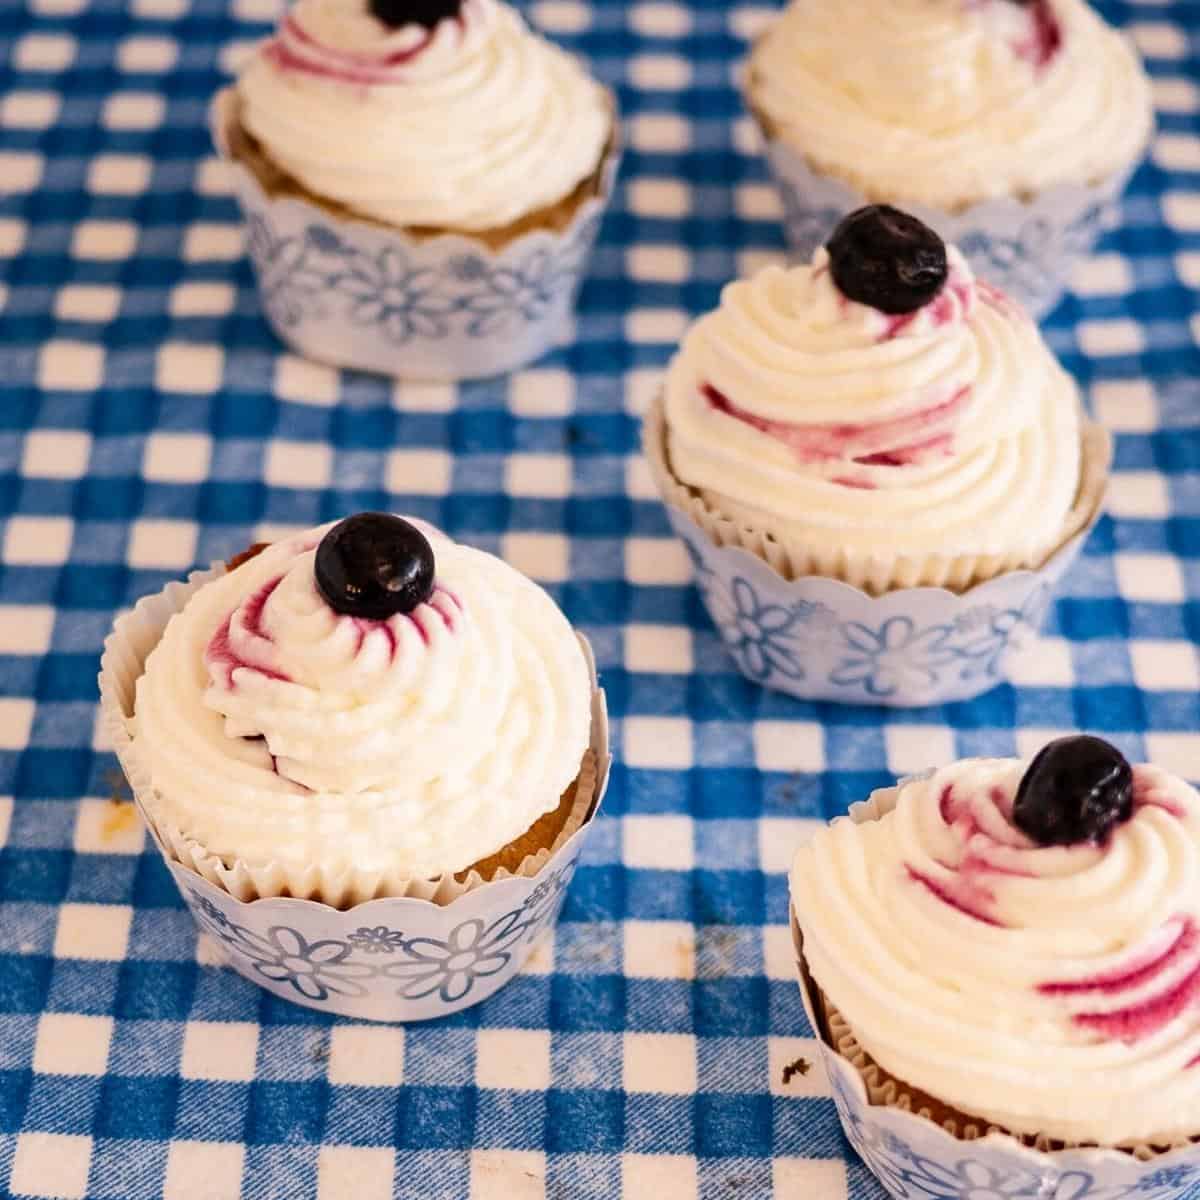 Frosted cupcakes with blueberry fillling.